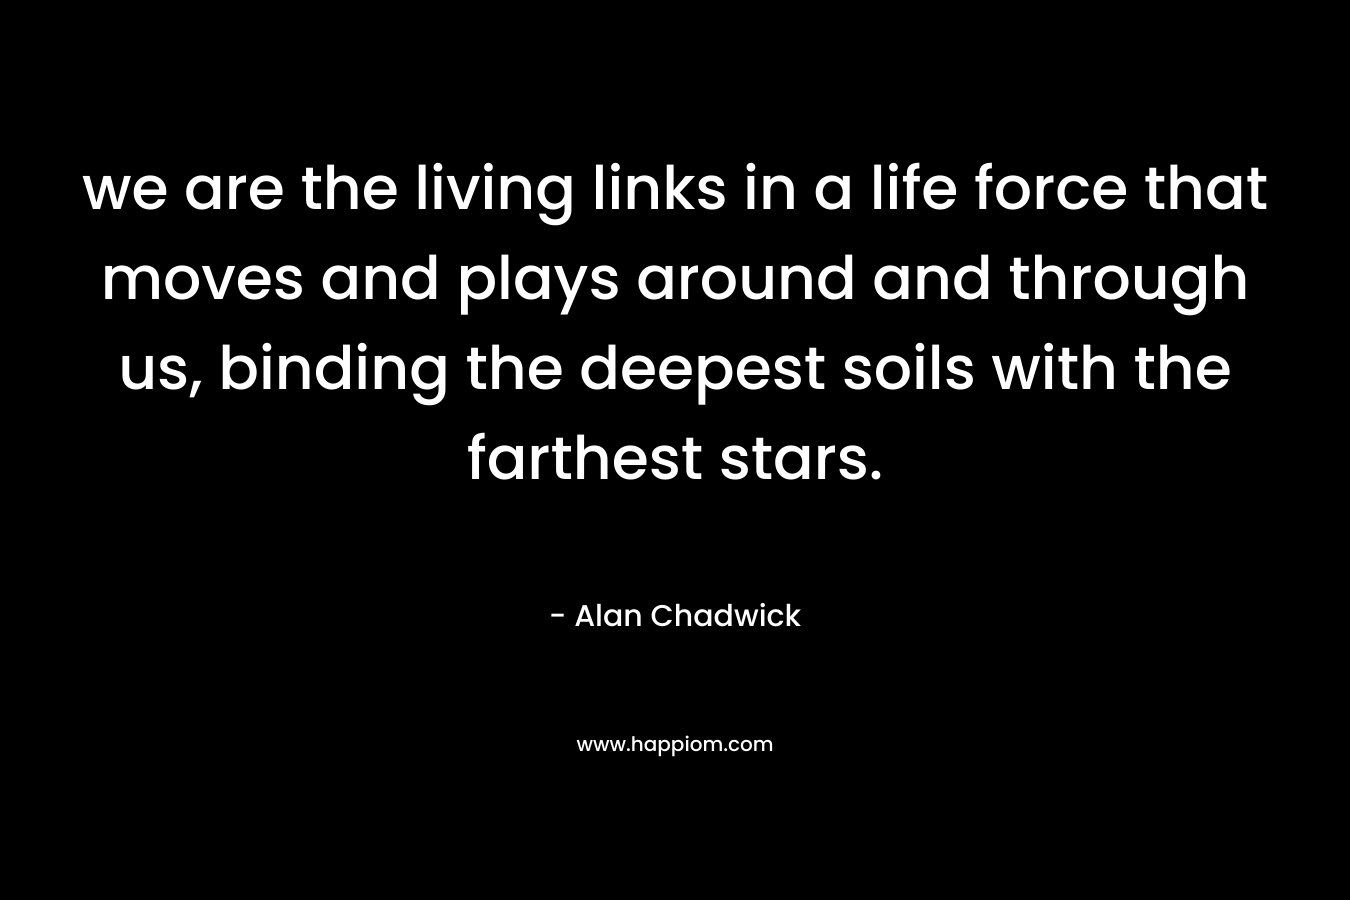 we are the living links in a life force that moves and plays around and through us, binding the deepest soils with the farthest stars. – Alan Chadwick